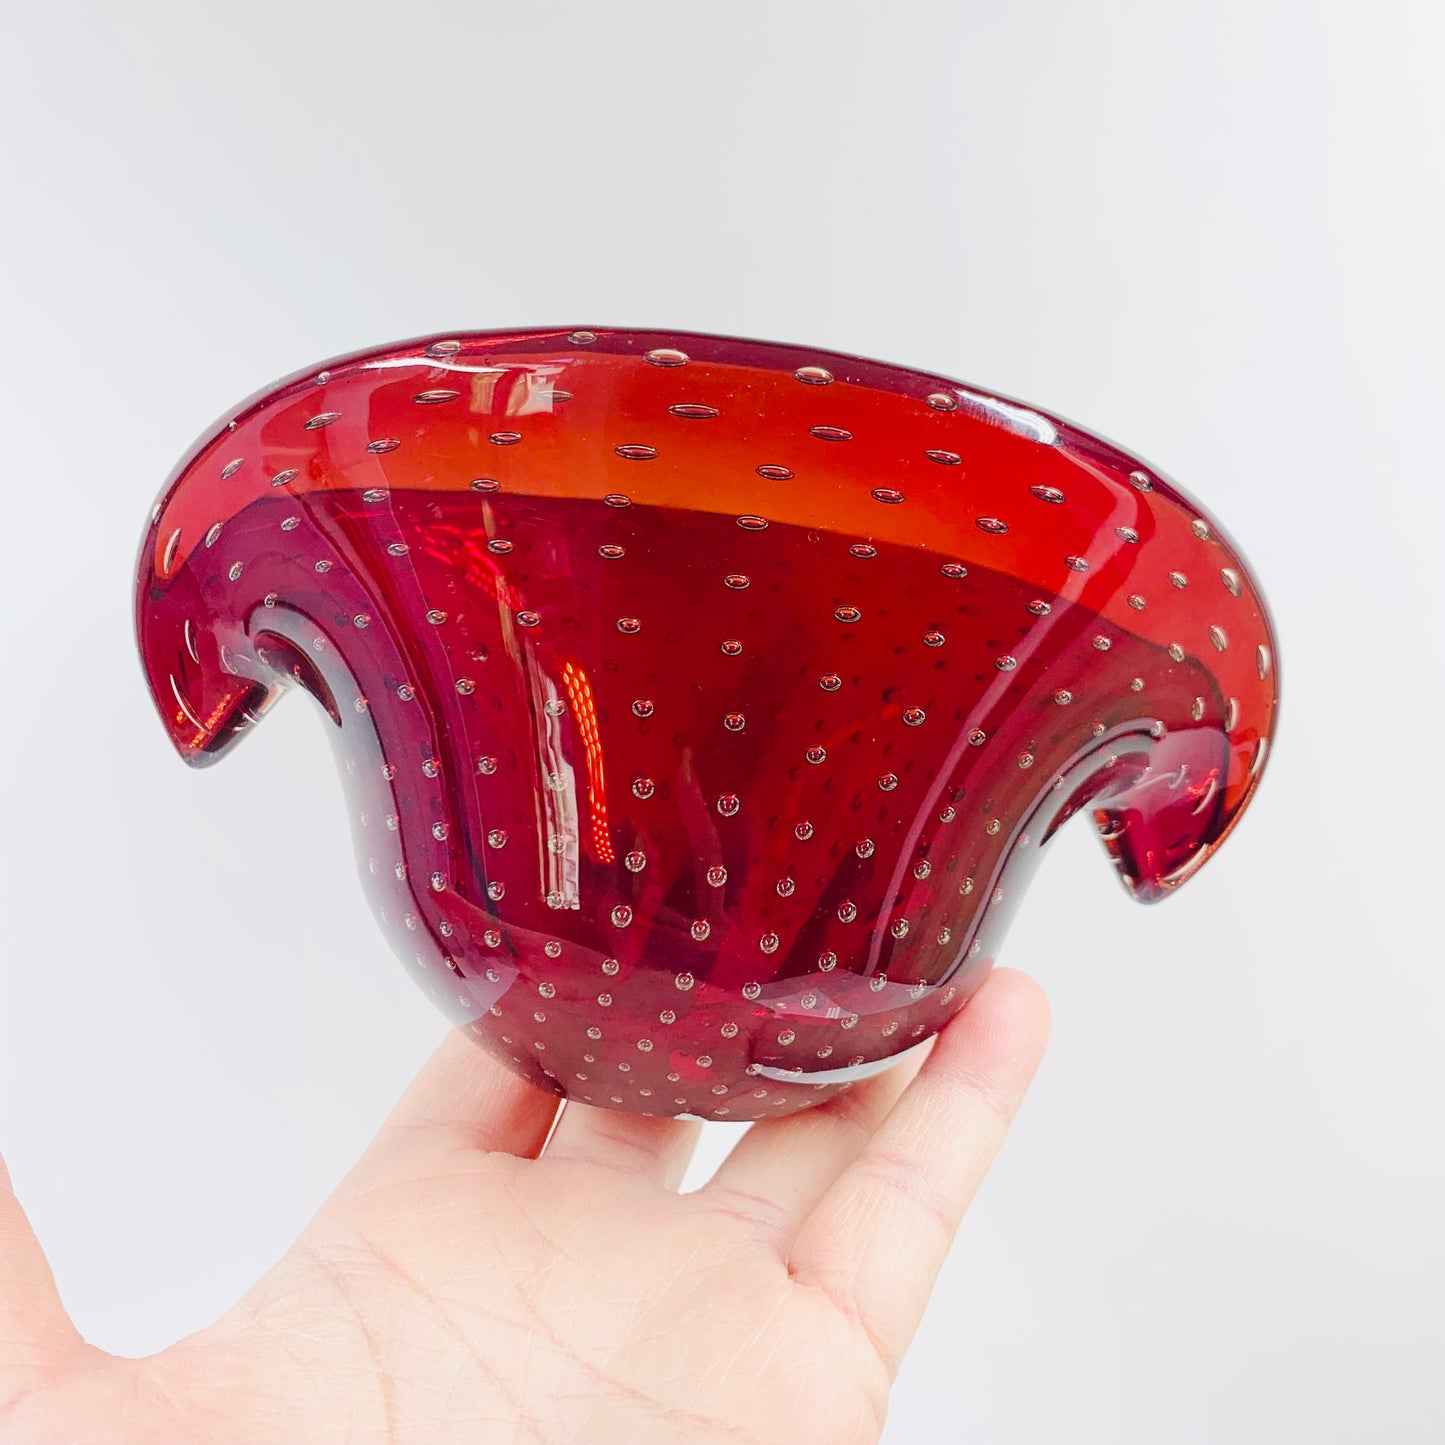 RED SHELL BOWL